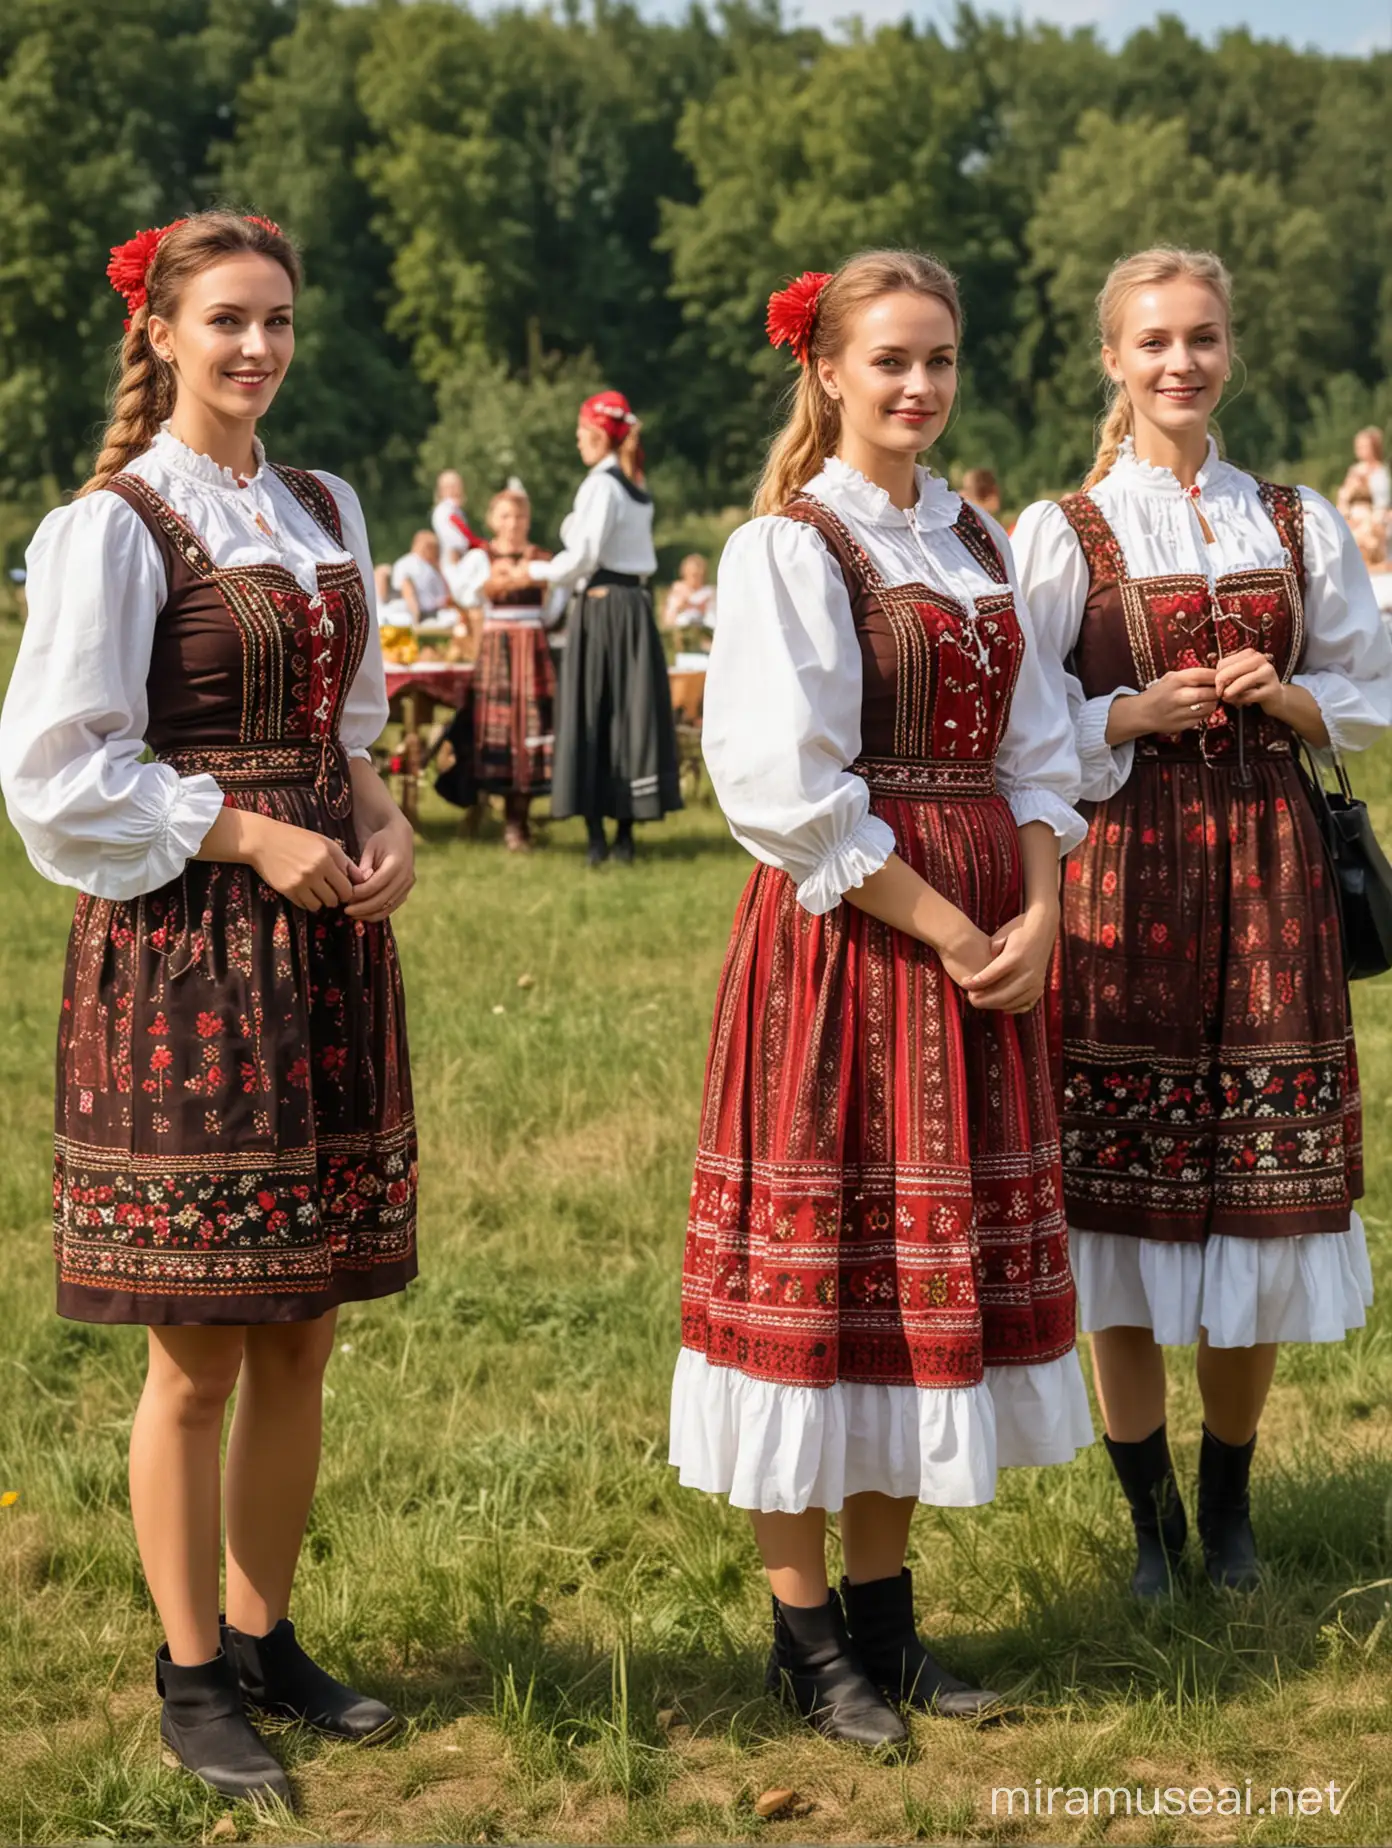 a big outdoor party with polish housewives in folk costumes, lots of national food, many guests from countryside, beautiful natural landscape